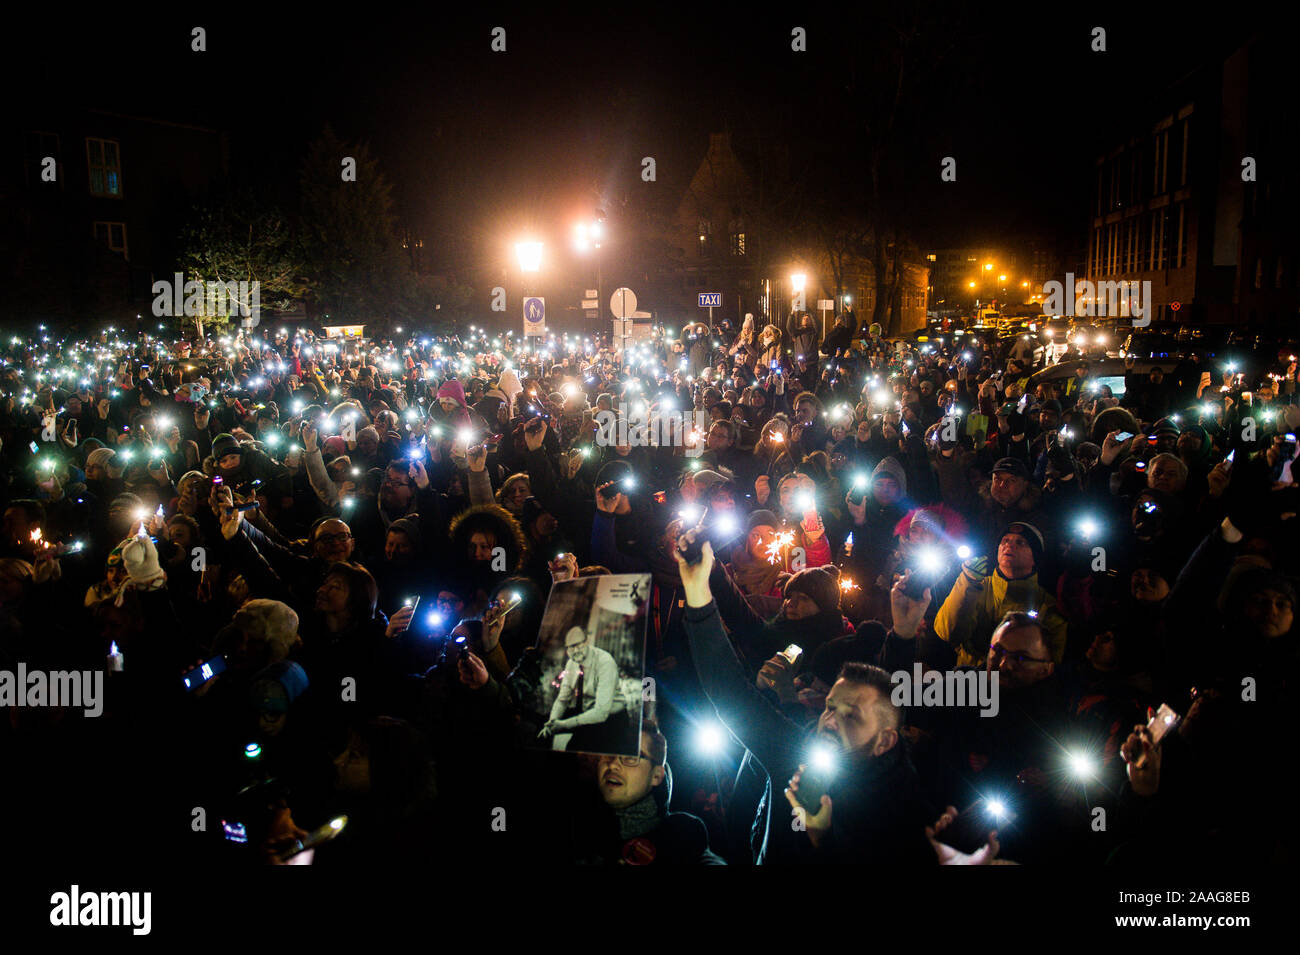 Gdansk, Poland. 20th Jan, 2019. Protesters use phones to shine light during the demonstration called Light to heaven for Pawel Adamowicz at the Coal Market in Gdansk. Mayor of Gdansk, Pawel Adamowicz was stabbed on stage while attending a charity event in Gdansk on 13 January and died a day later of his injuries. Credit: Mateusz Slodkowski/SOPA Images/ZUMA Wire/Alamy Live News Stock Photo